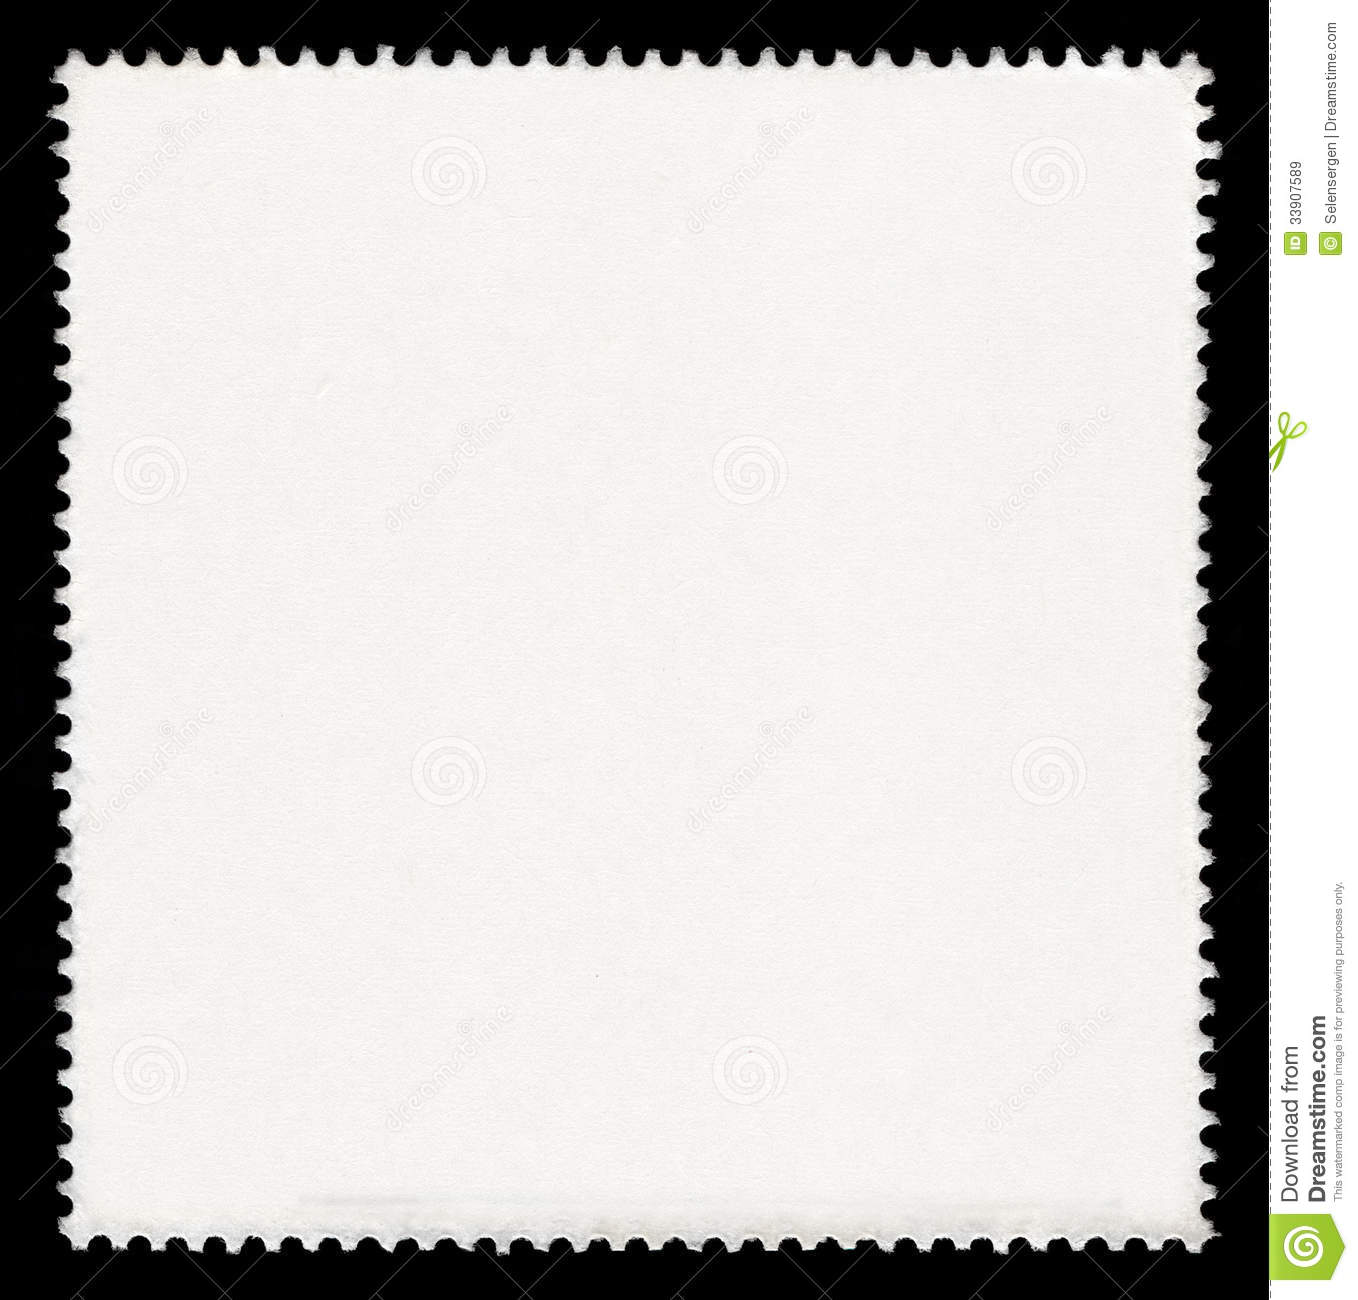 Blank Postage Stamp Royalty Free Stock Images   Image  33907589